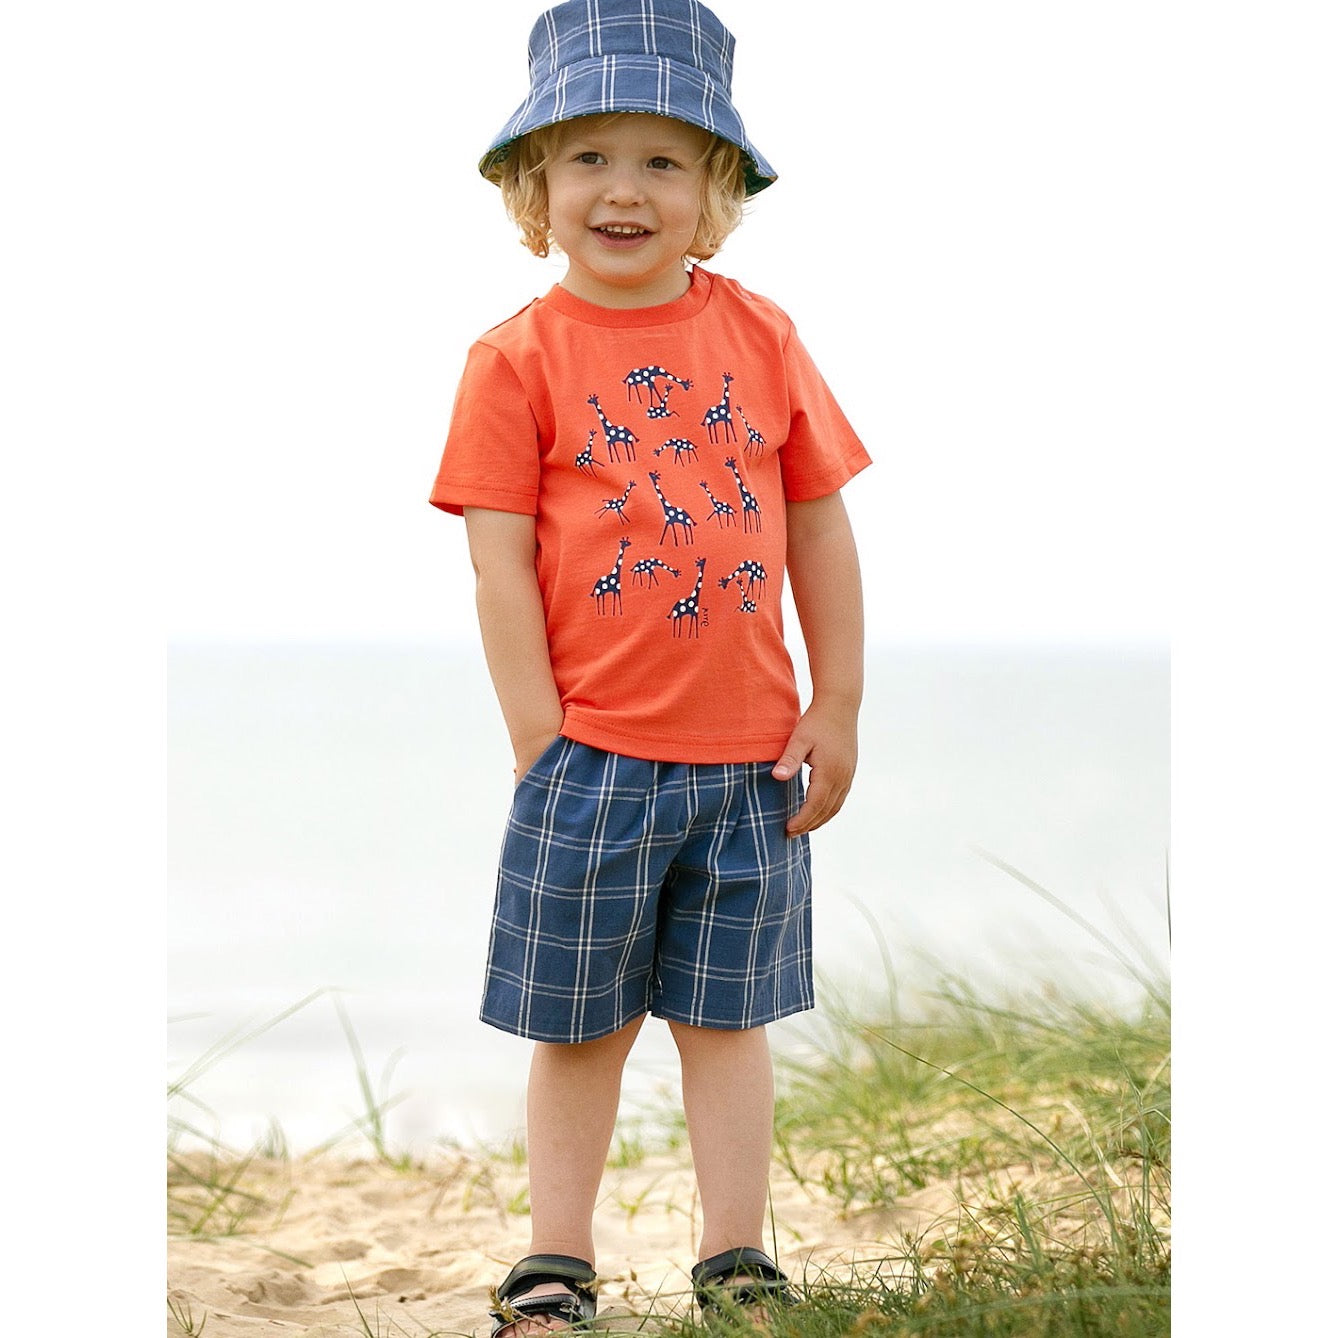 Kite Special Check Infant Shorts 9954 Clothing 9-12M / Blue,12-18M / Blue,18-24M/2Y / Blue,3YRS / Blue,4YRS / Blue,5YRS / Blue